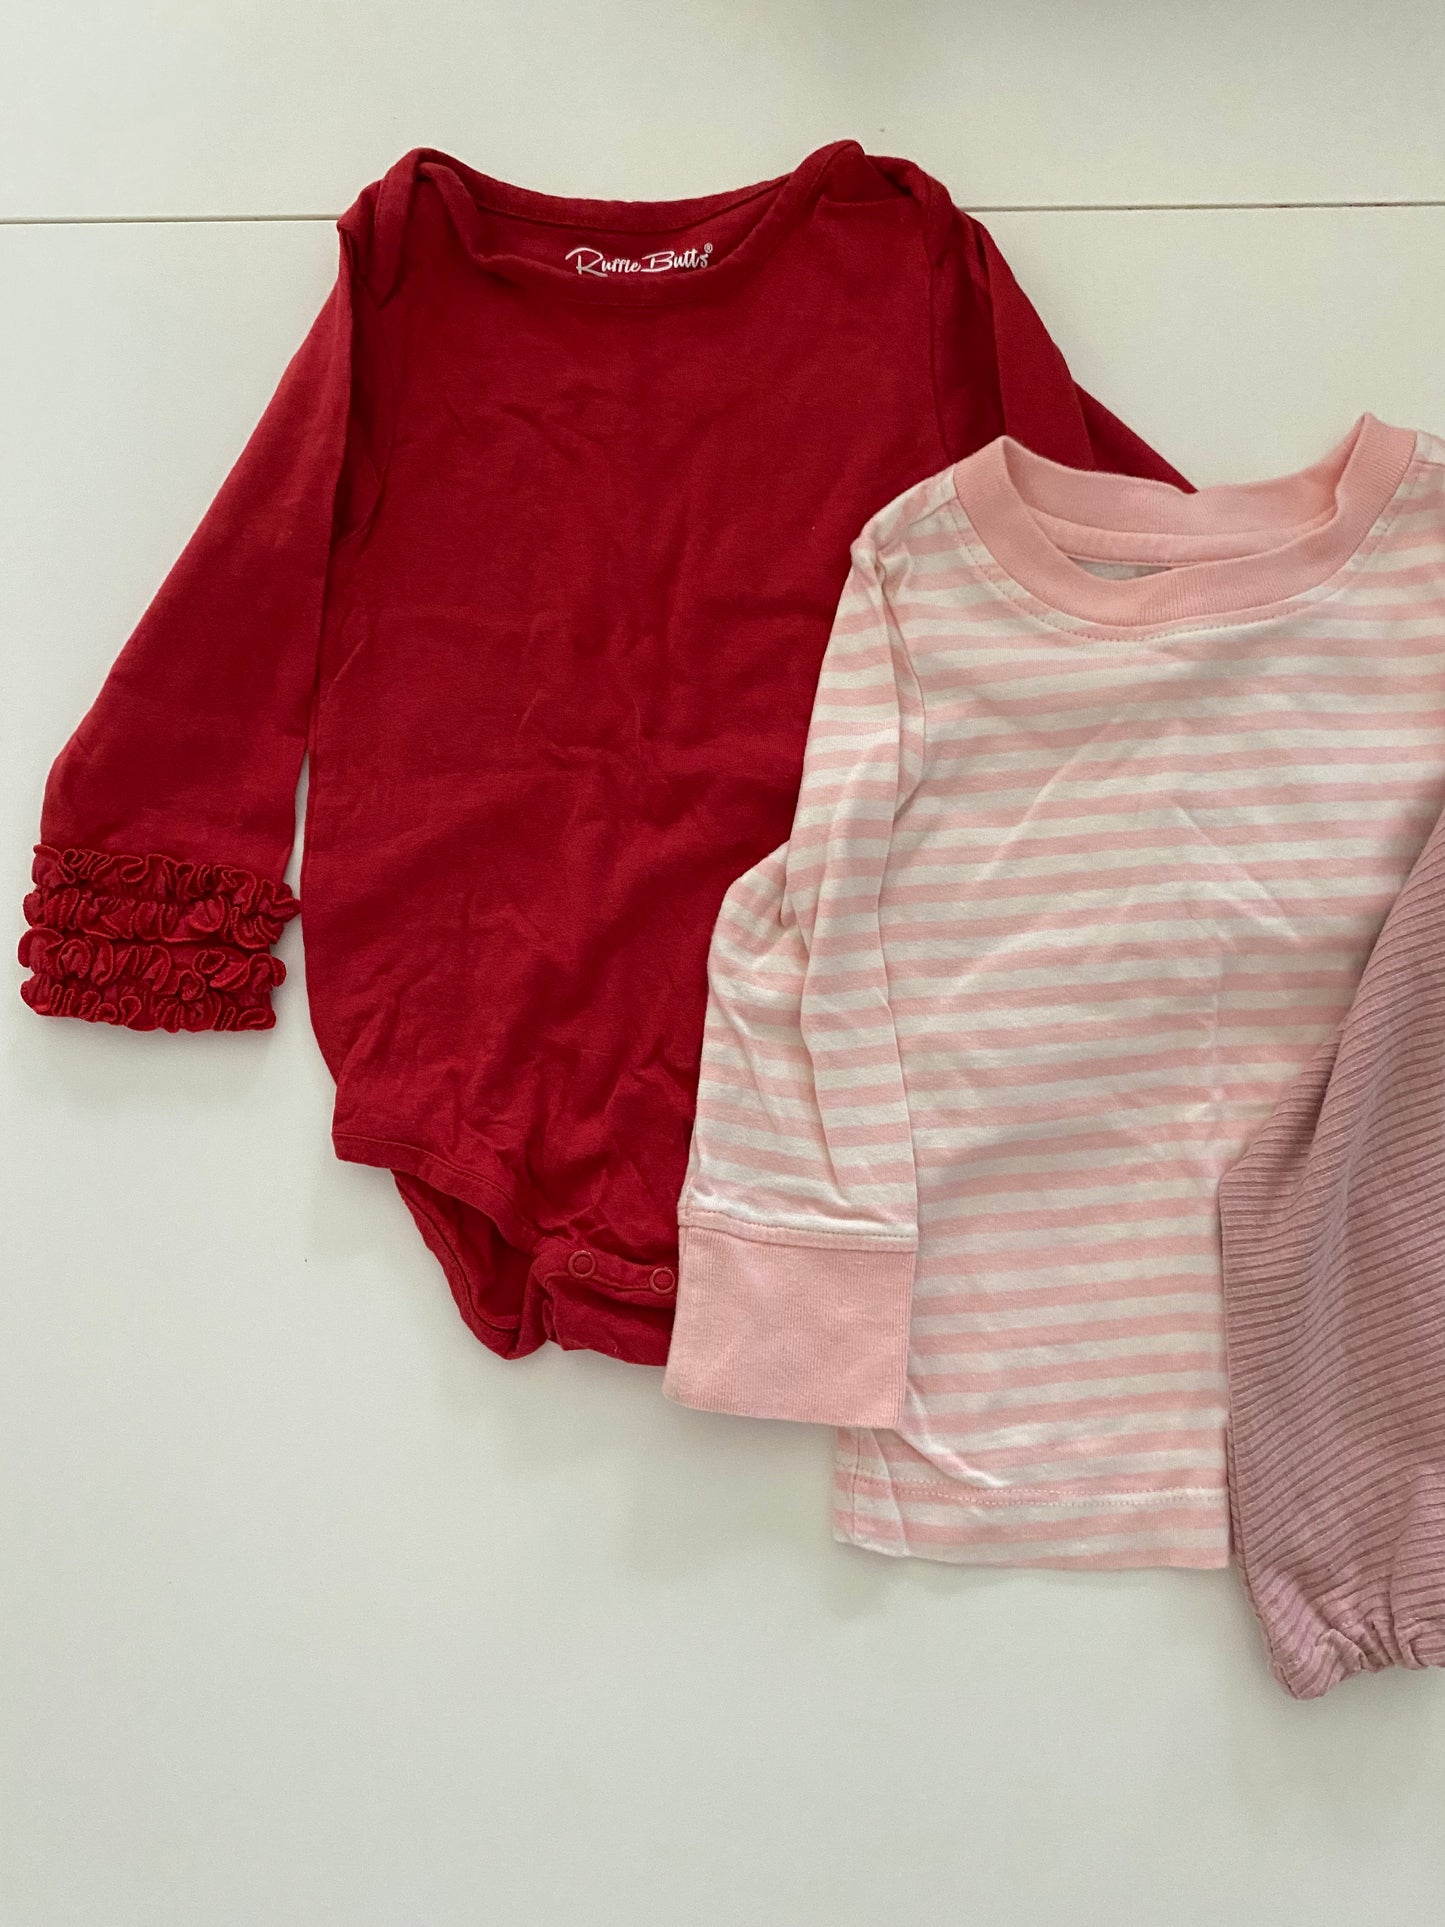 Hanna Andersson pink & white striped shirt and Ruffle Butts Red ruffle onesie and Amazon Blush Pink long-sleeved shirt bundle Girls 18-24M